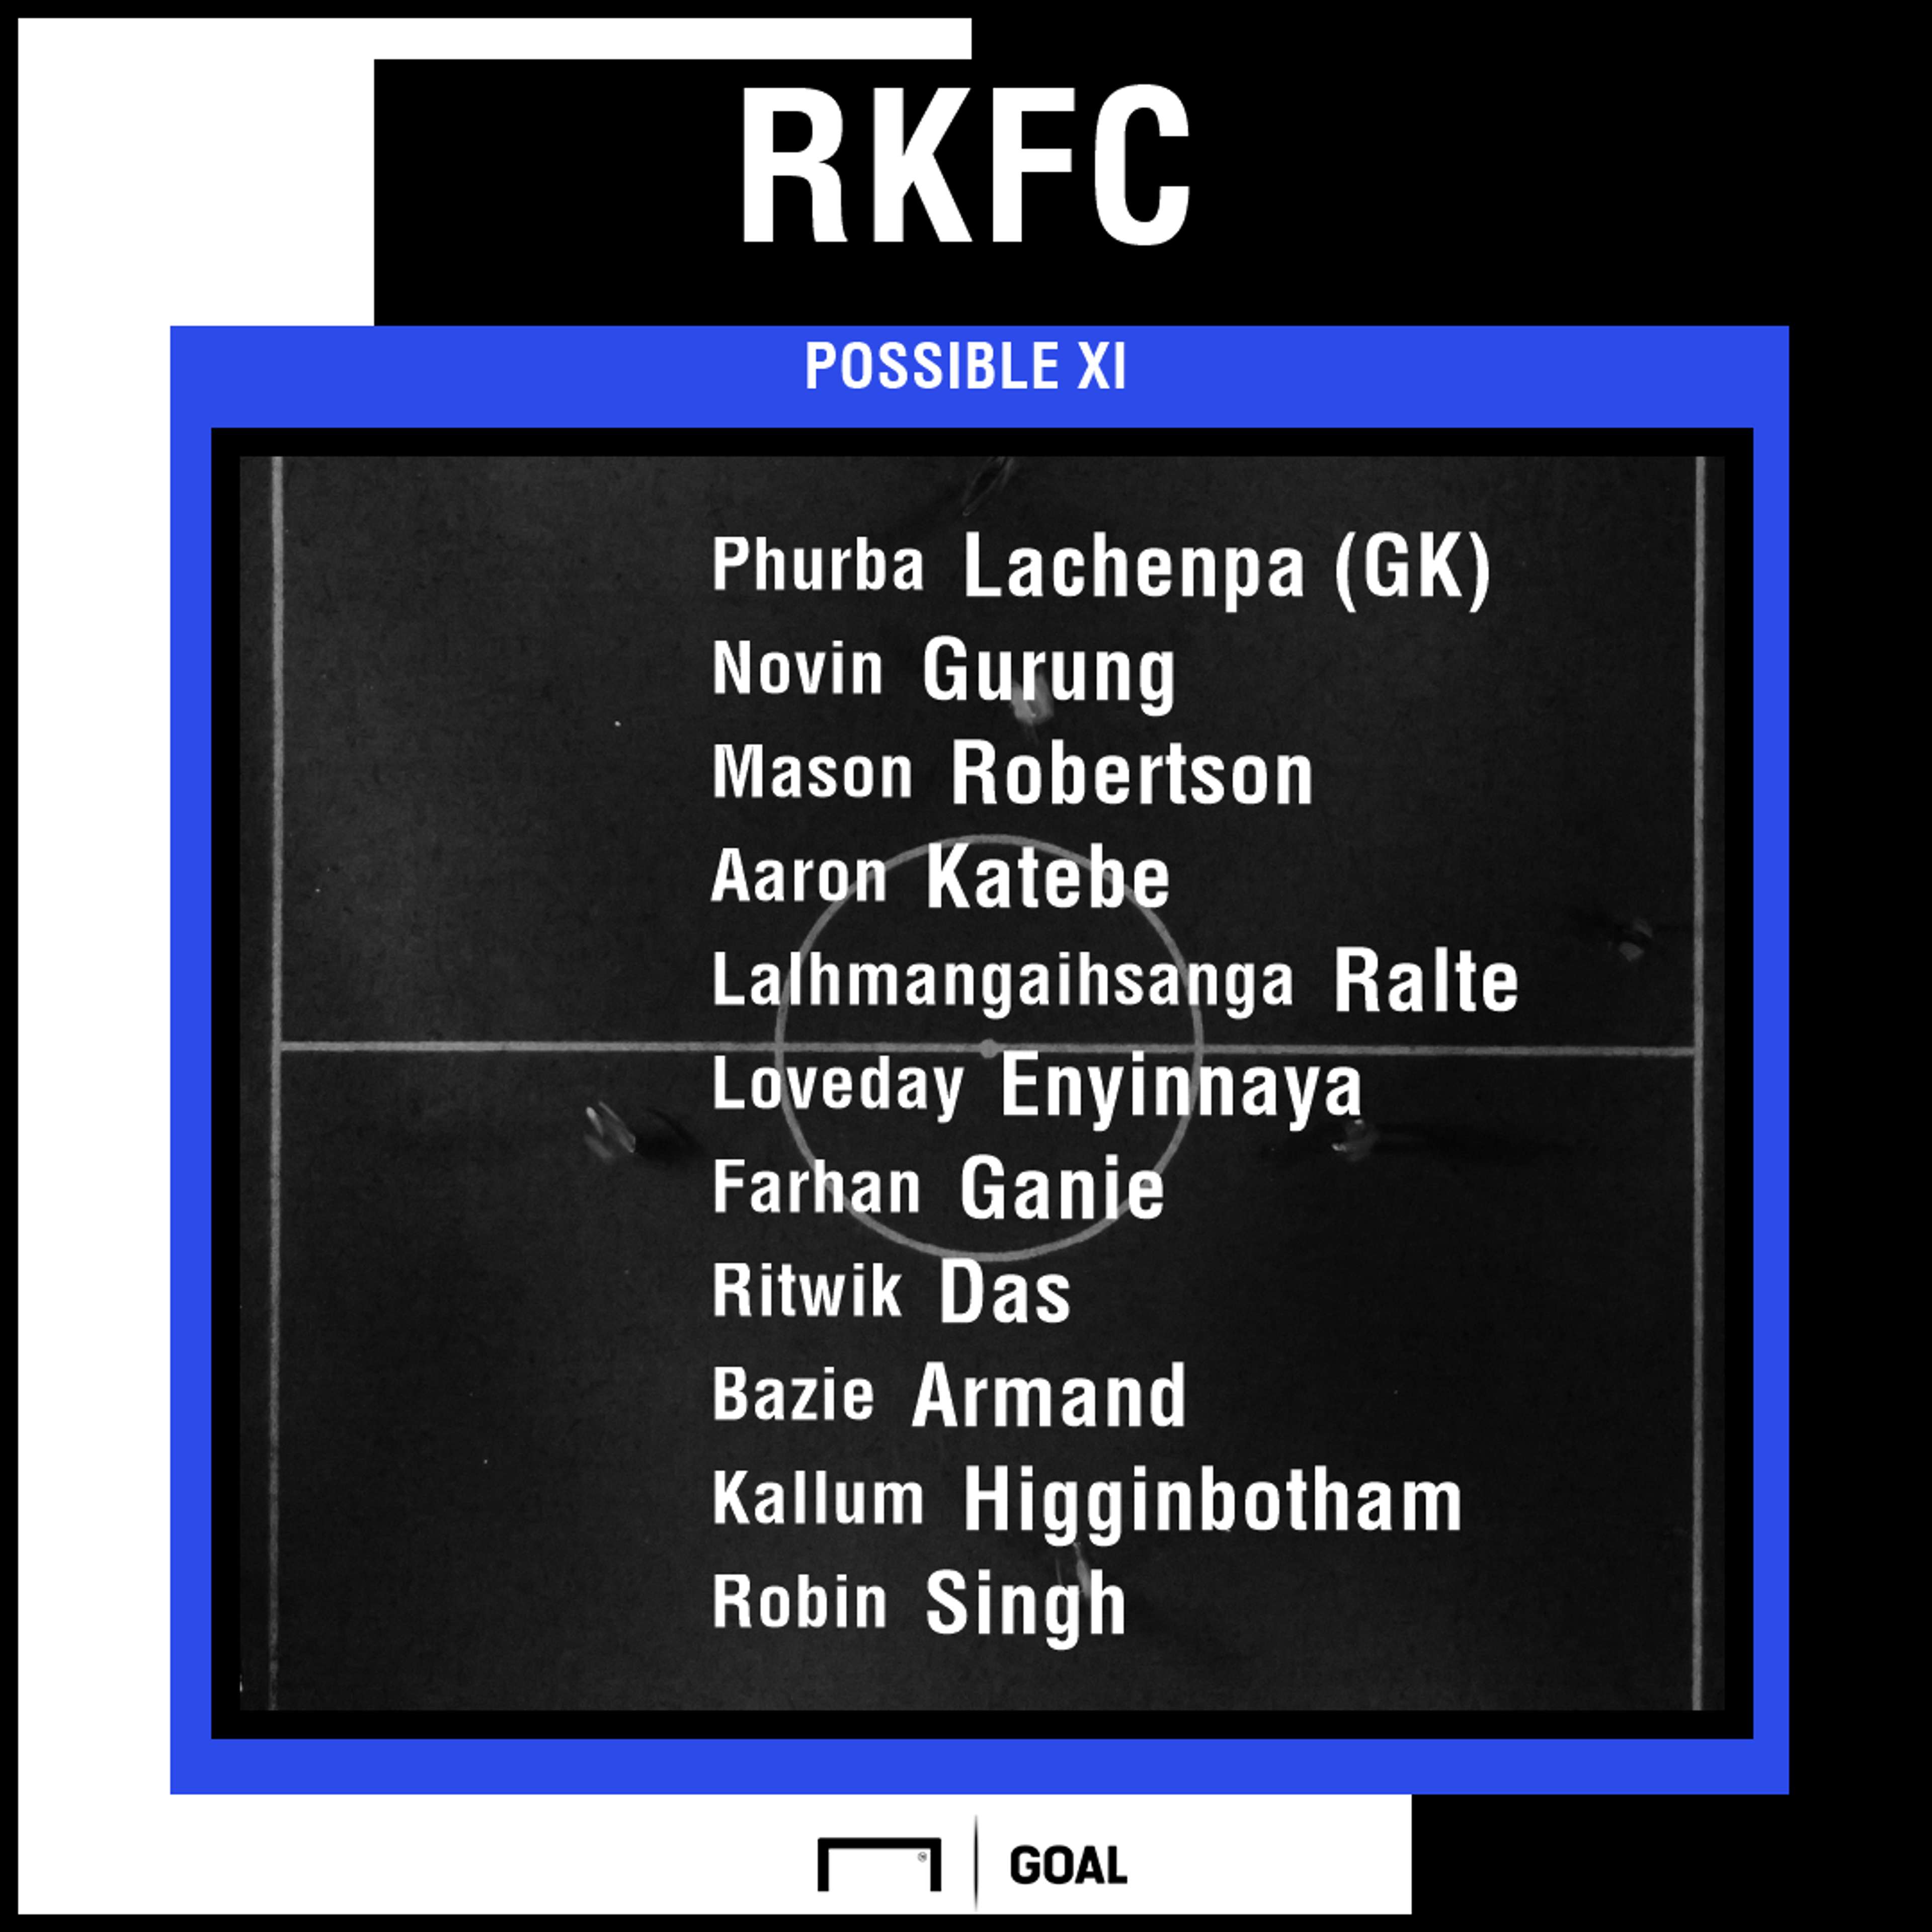 Real Kashmir possible XI